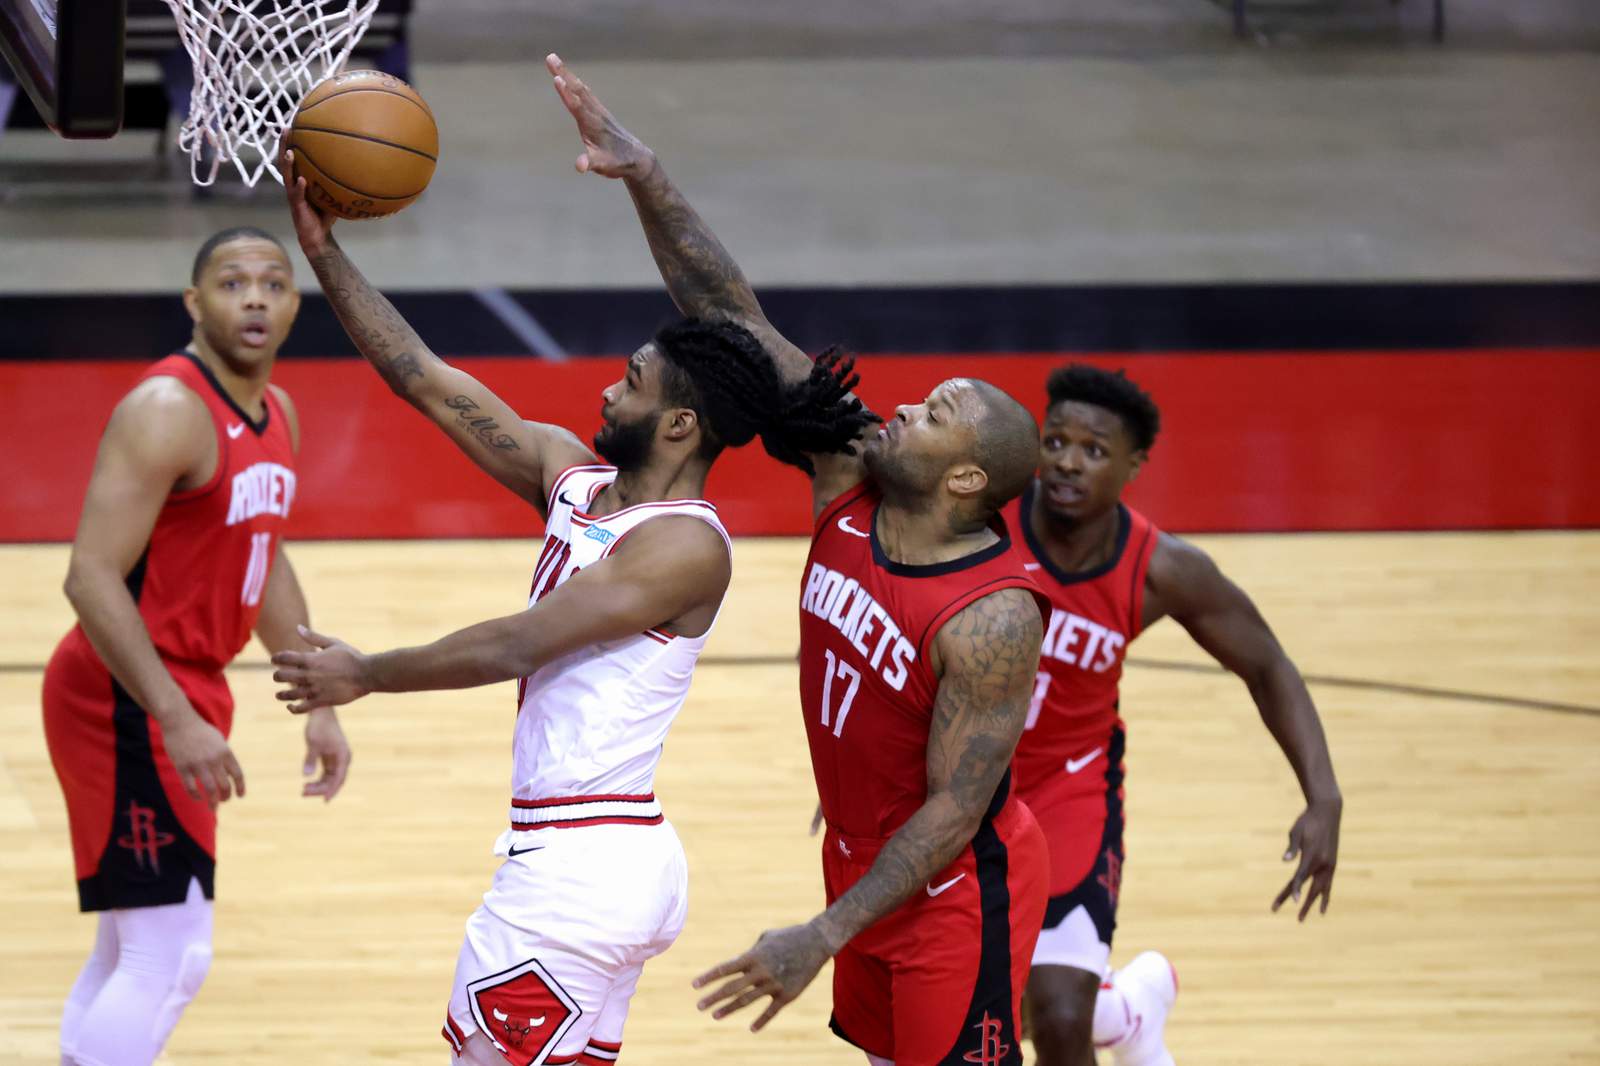 Coby White scores 24, Bulls hand Rockets 8th straight loss